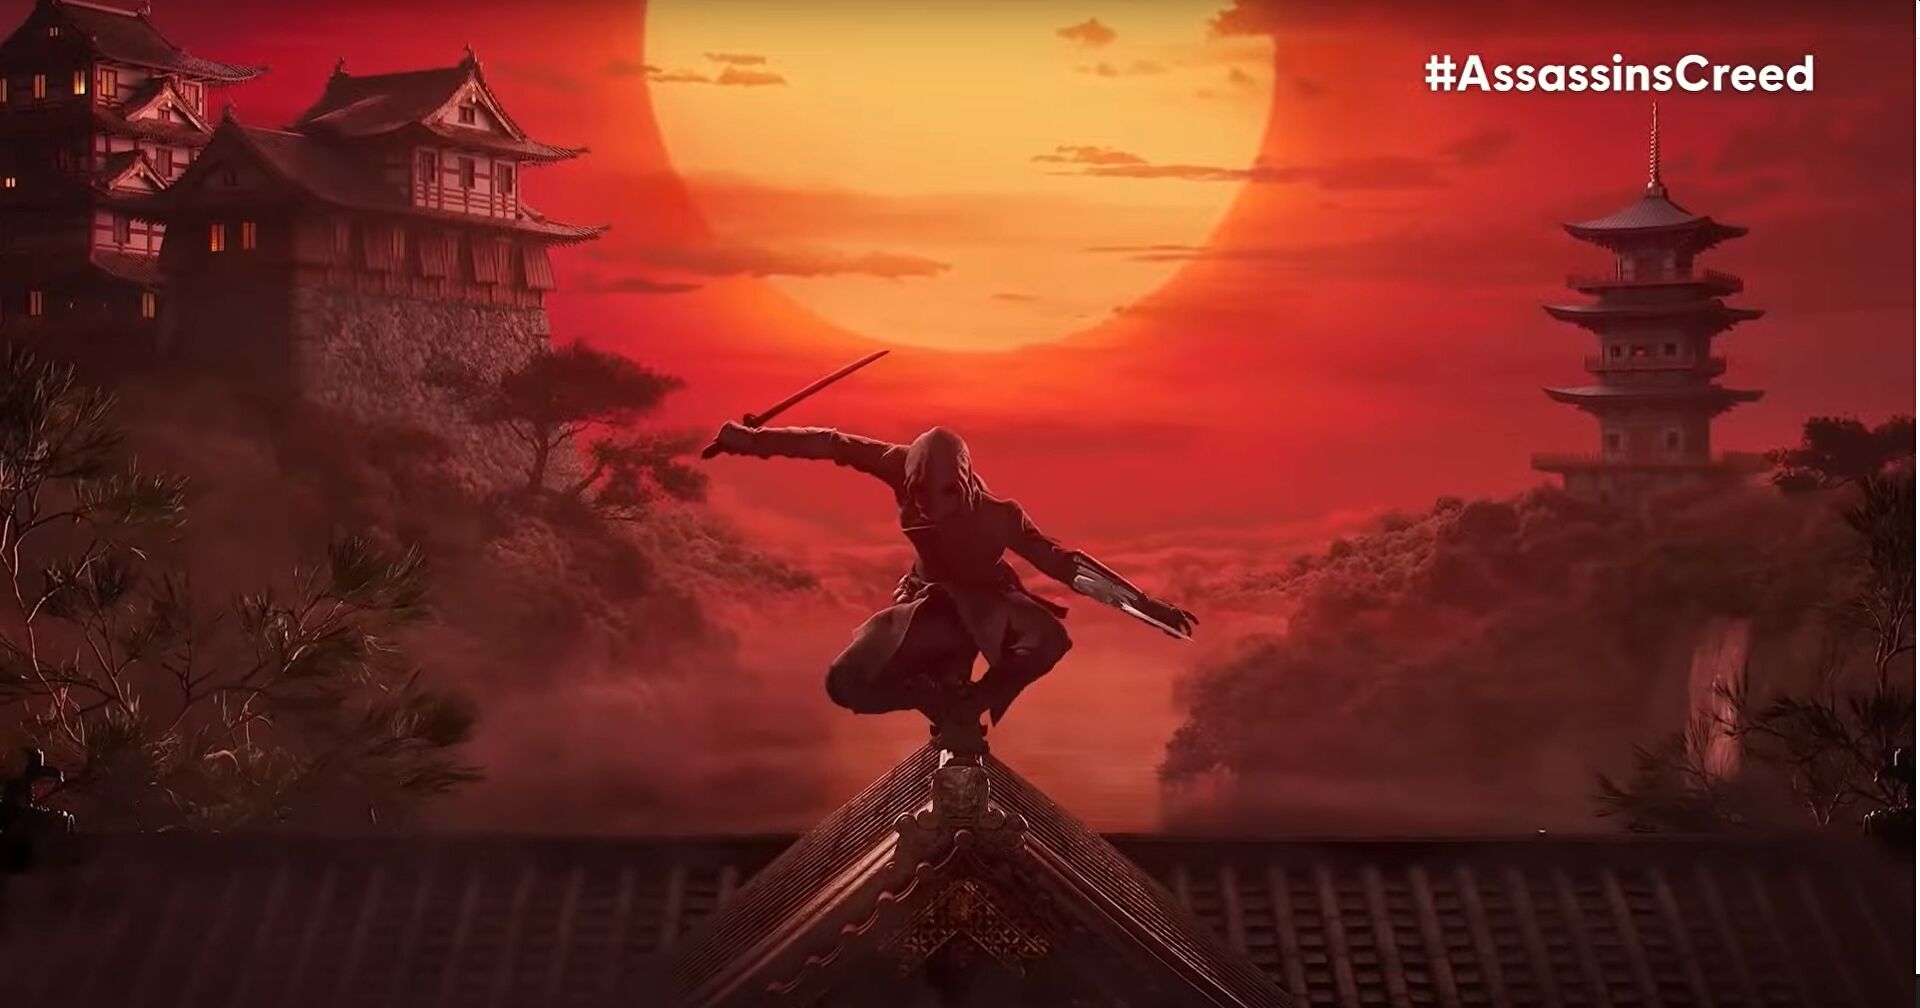 assassin's-creed-is-finally-heading-to-feudal-japan,-plus-one-with-blair-witch-vibes